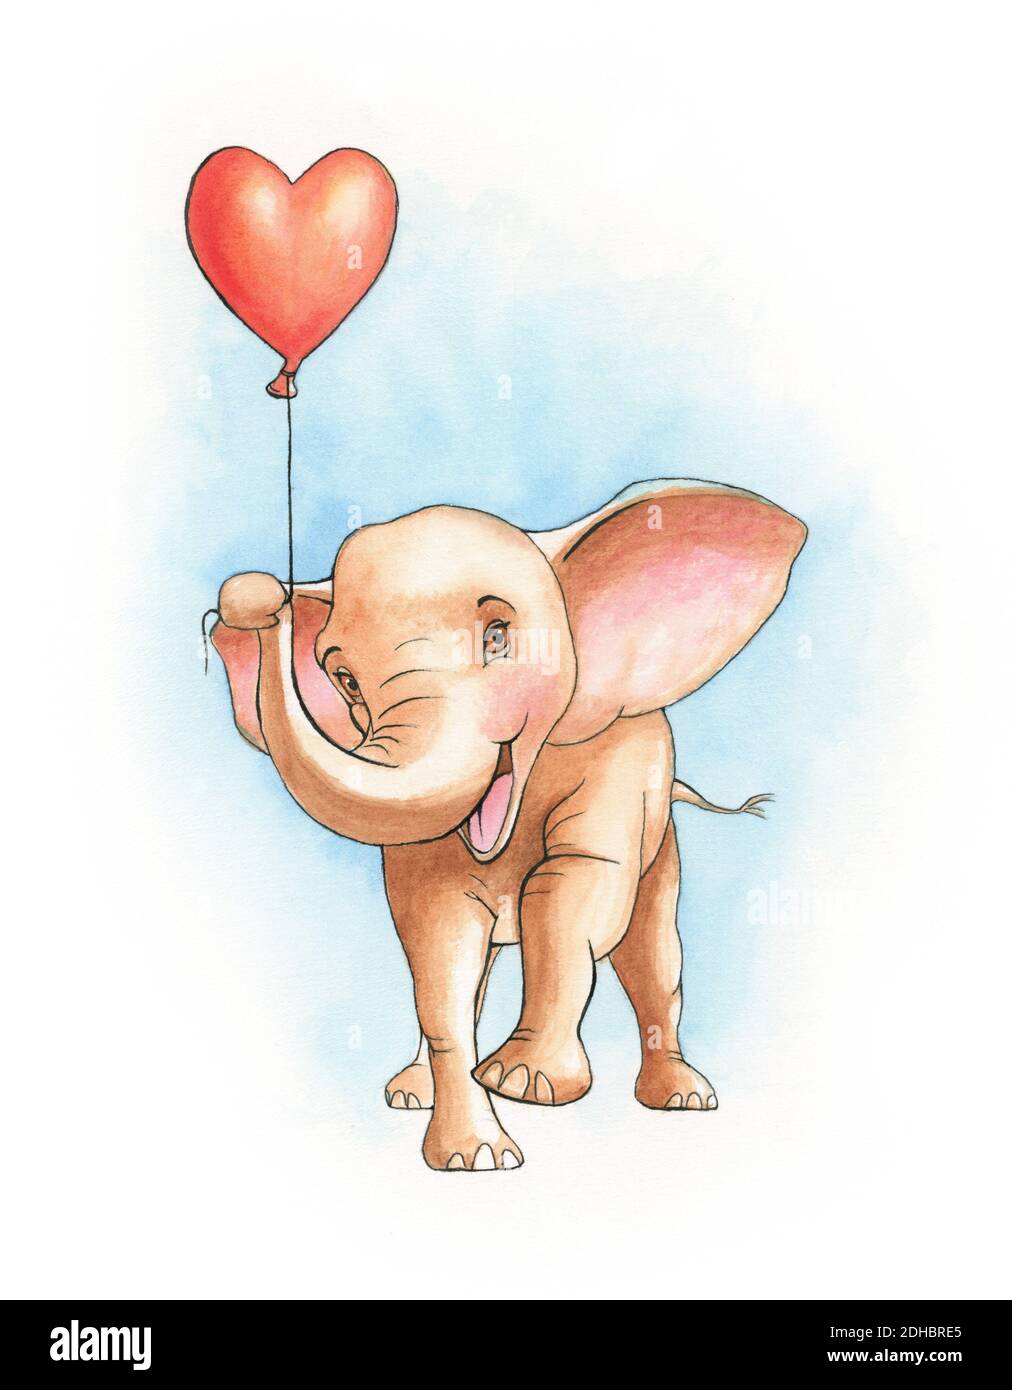 Cute elephant holding an heart shaped balloon. Watercolor illustration on paper. Stock Photo